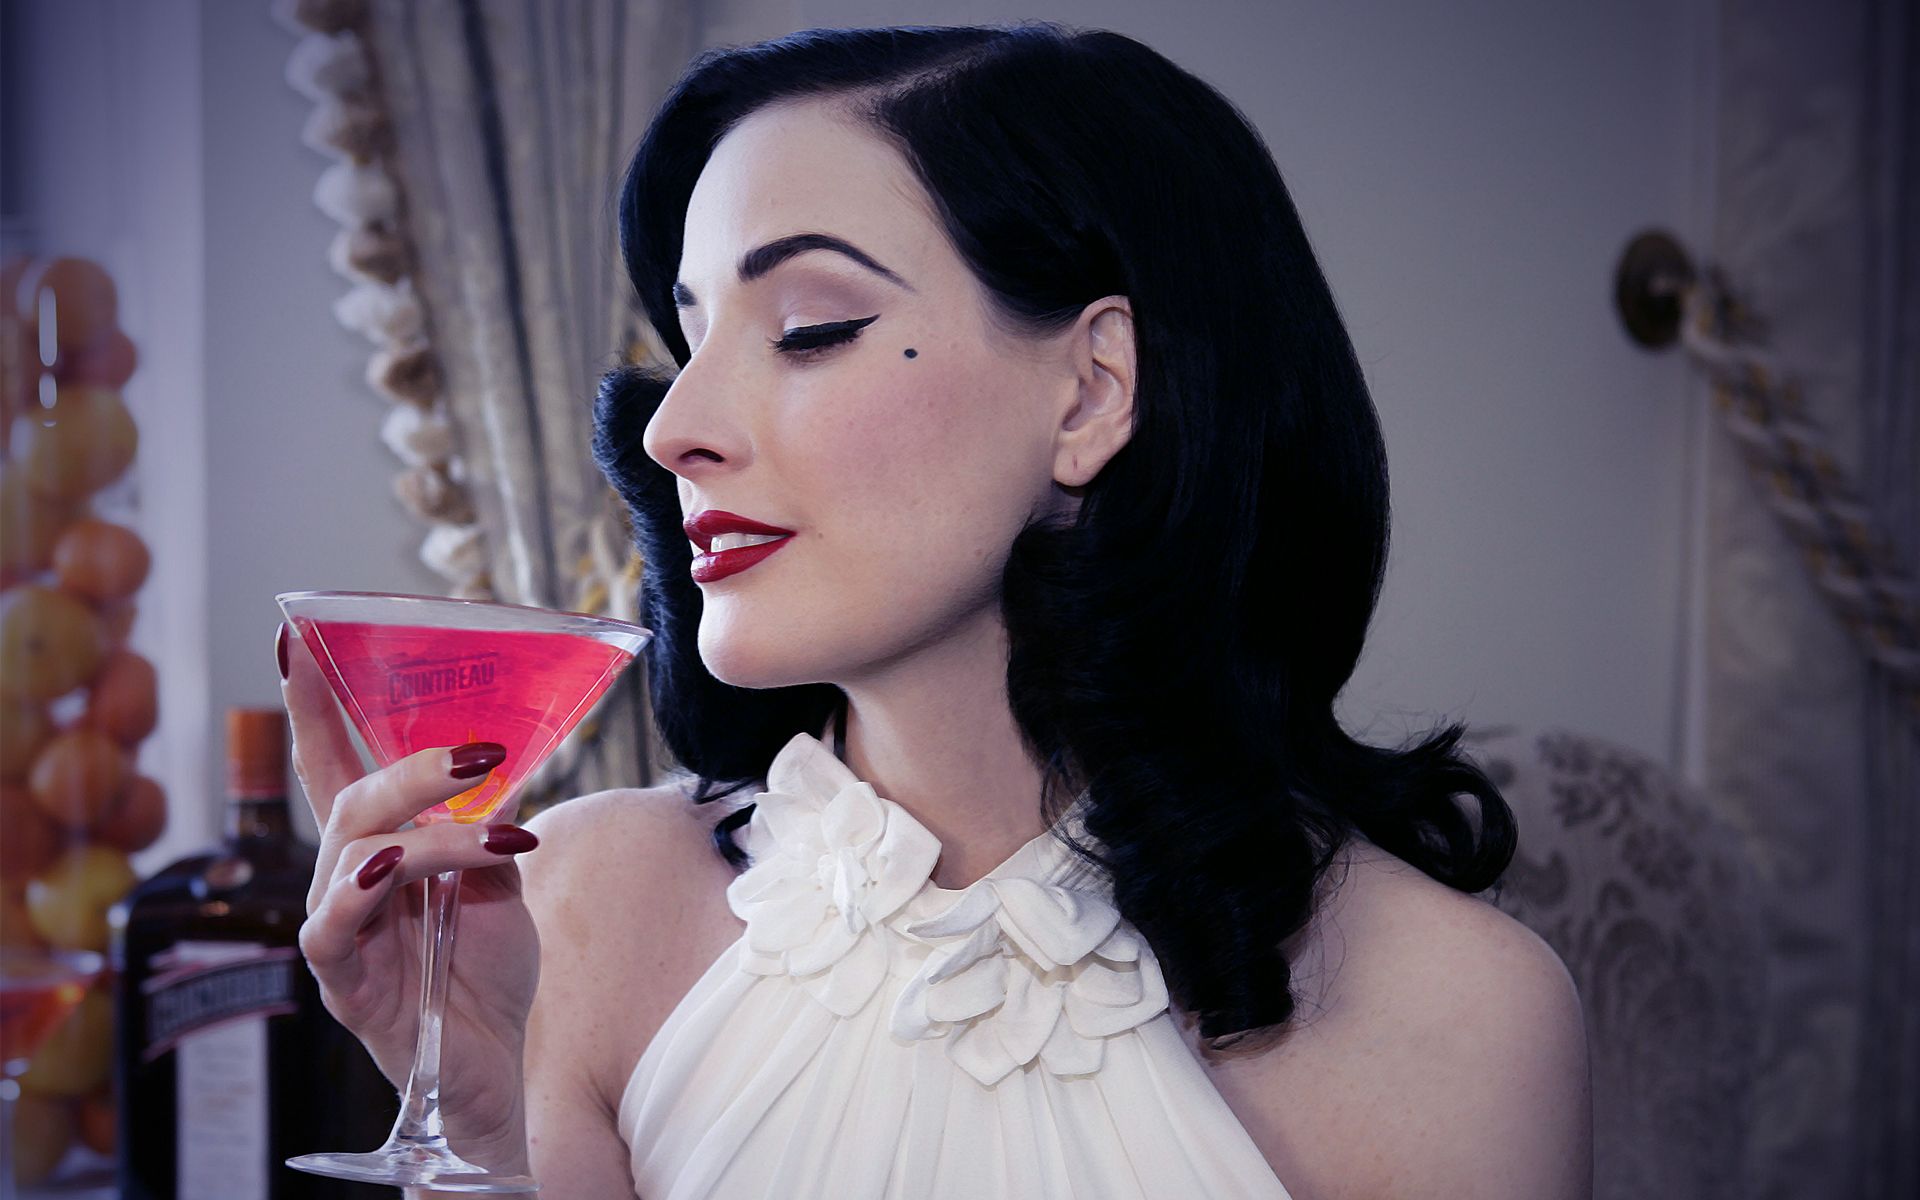 Dita Von Teese Wallpaper High Resolution and Quality Download